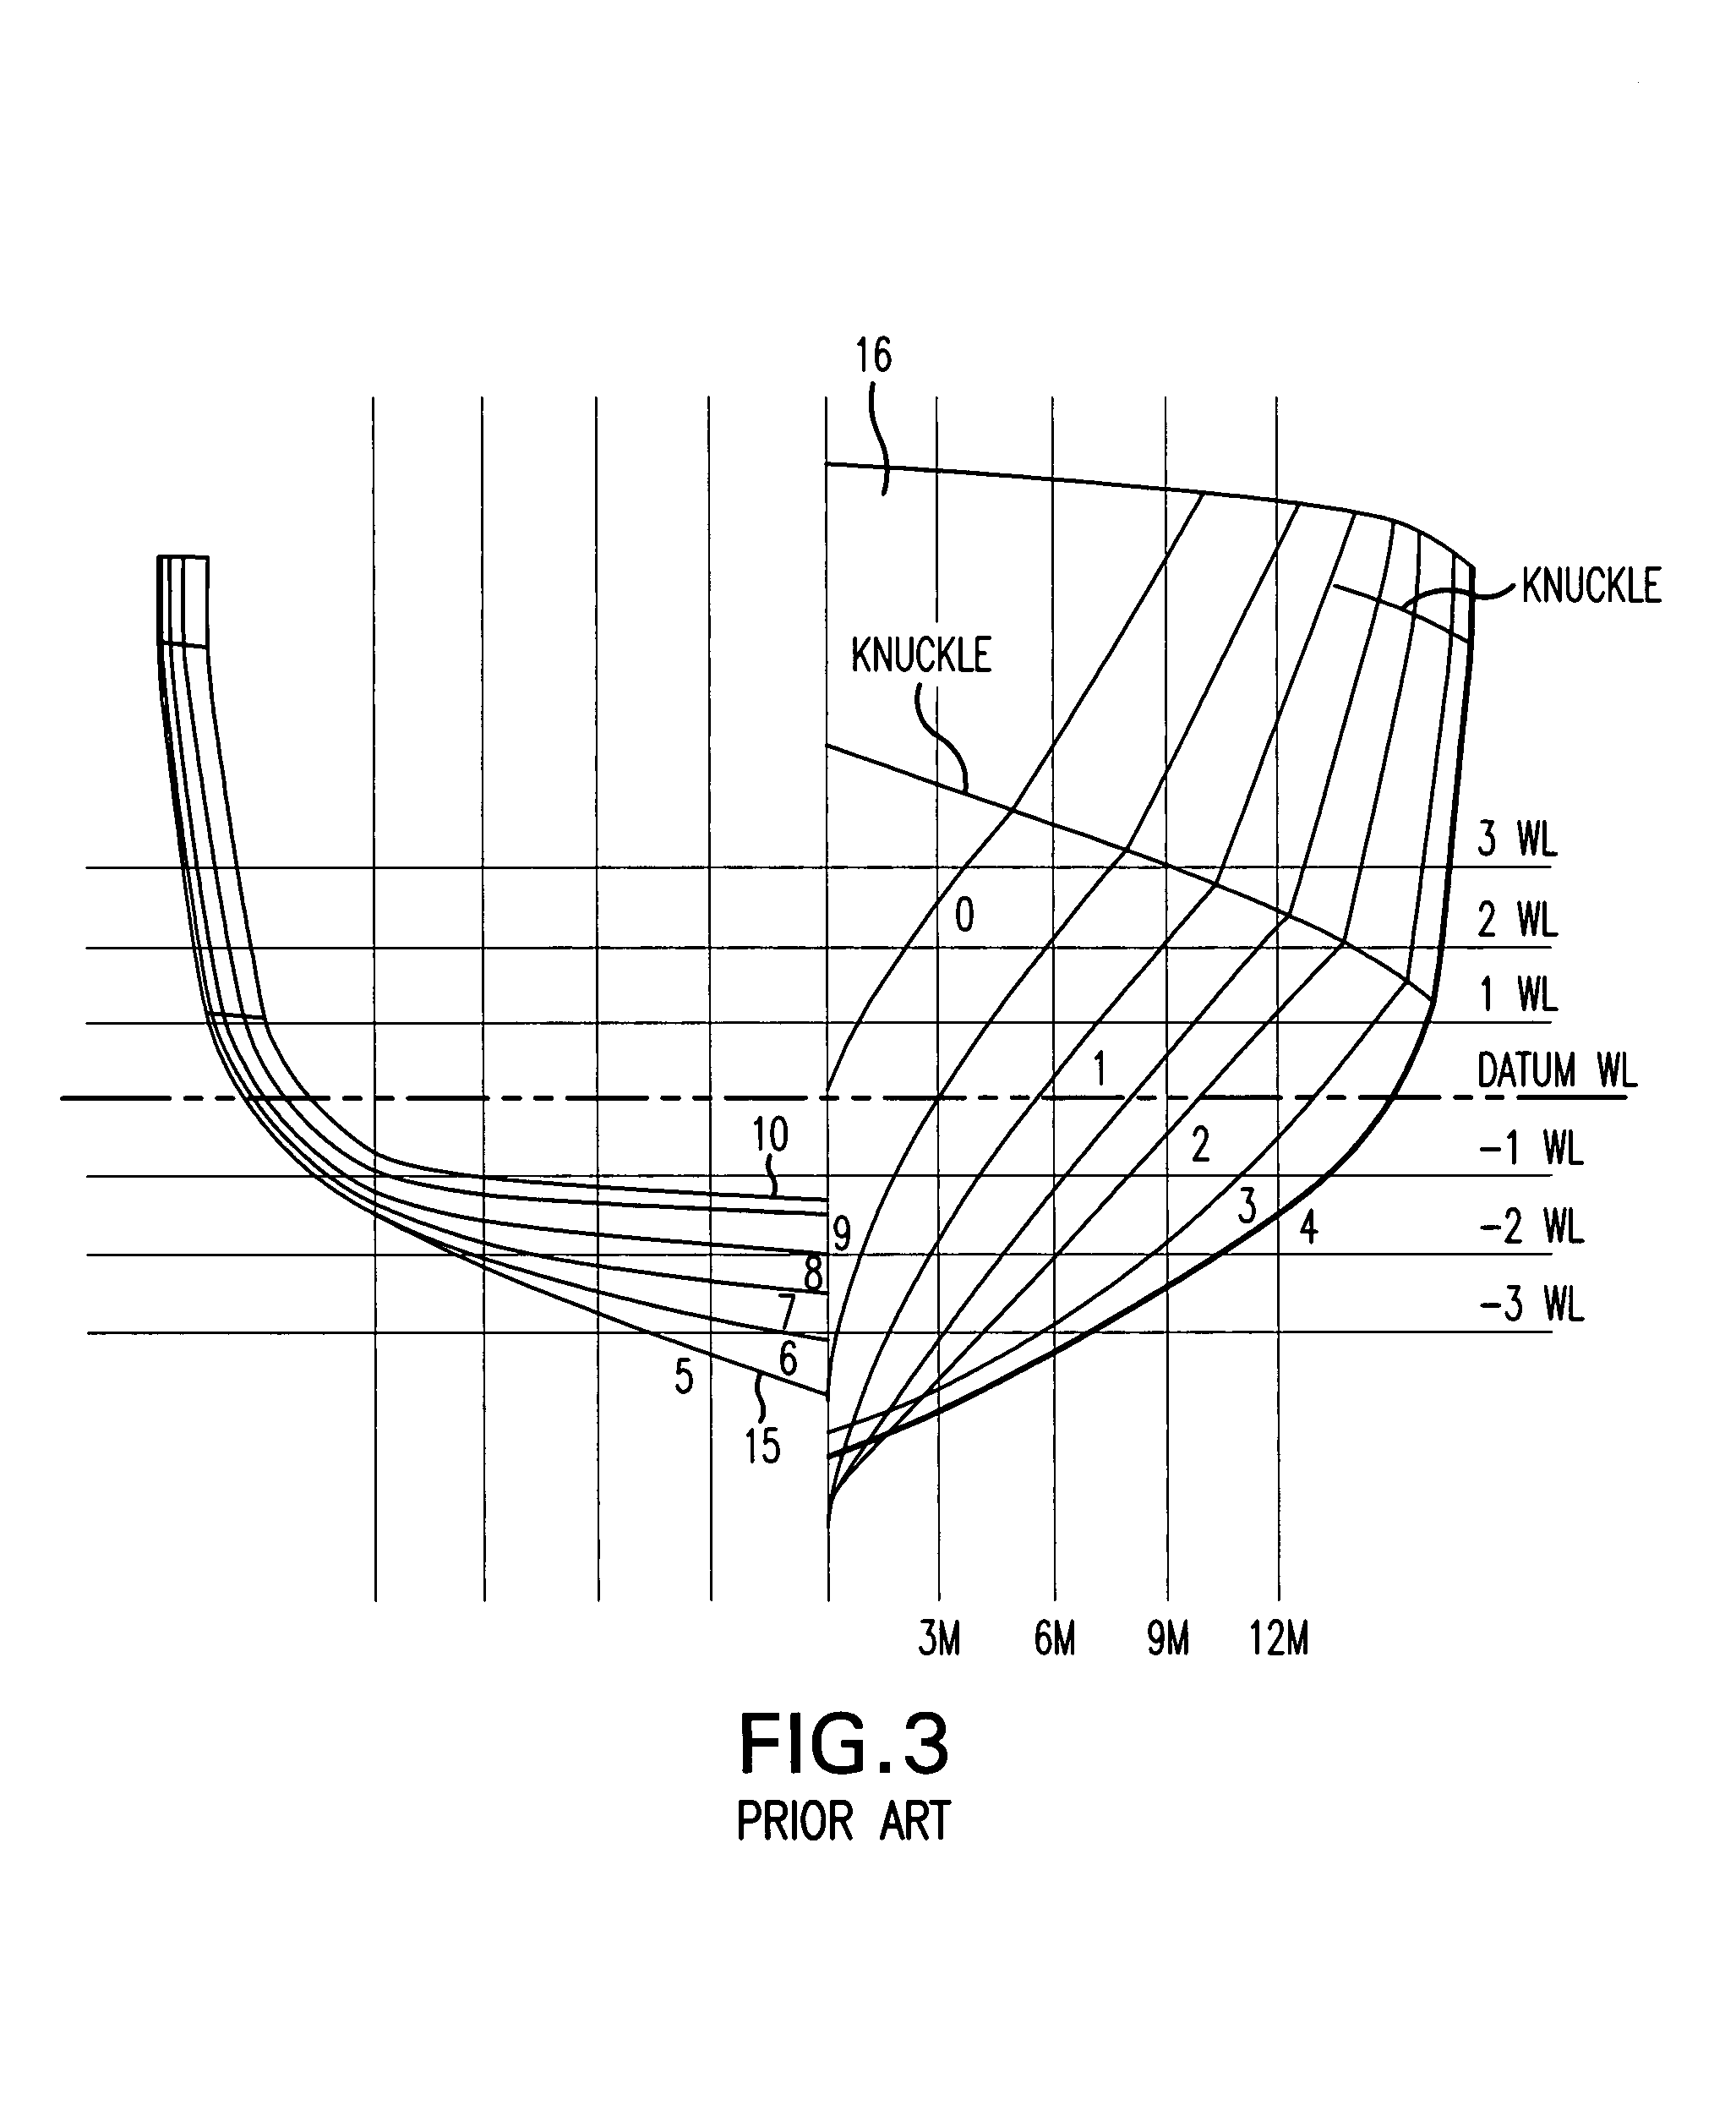 Monohull fast ship or semi-planing monohull with a drag reduction method